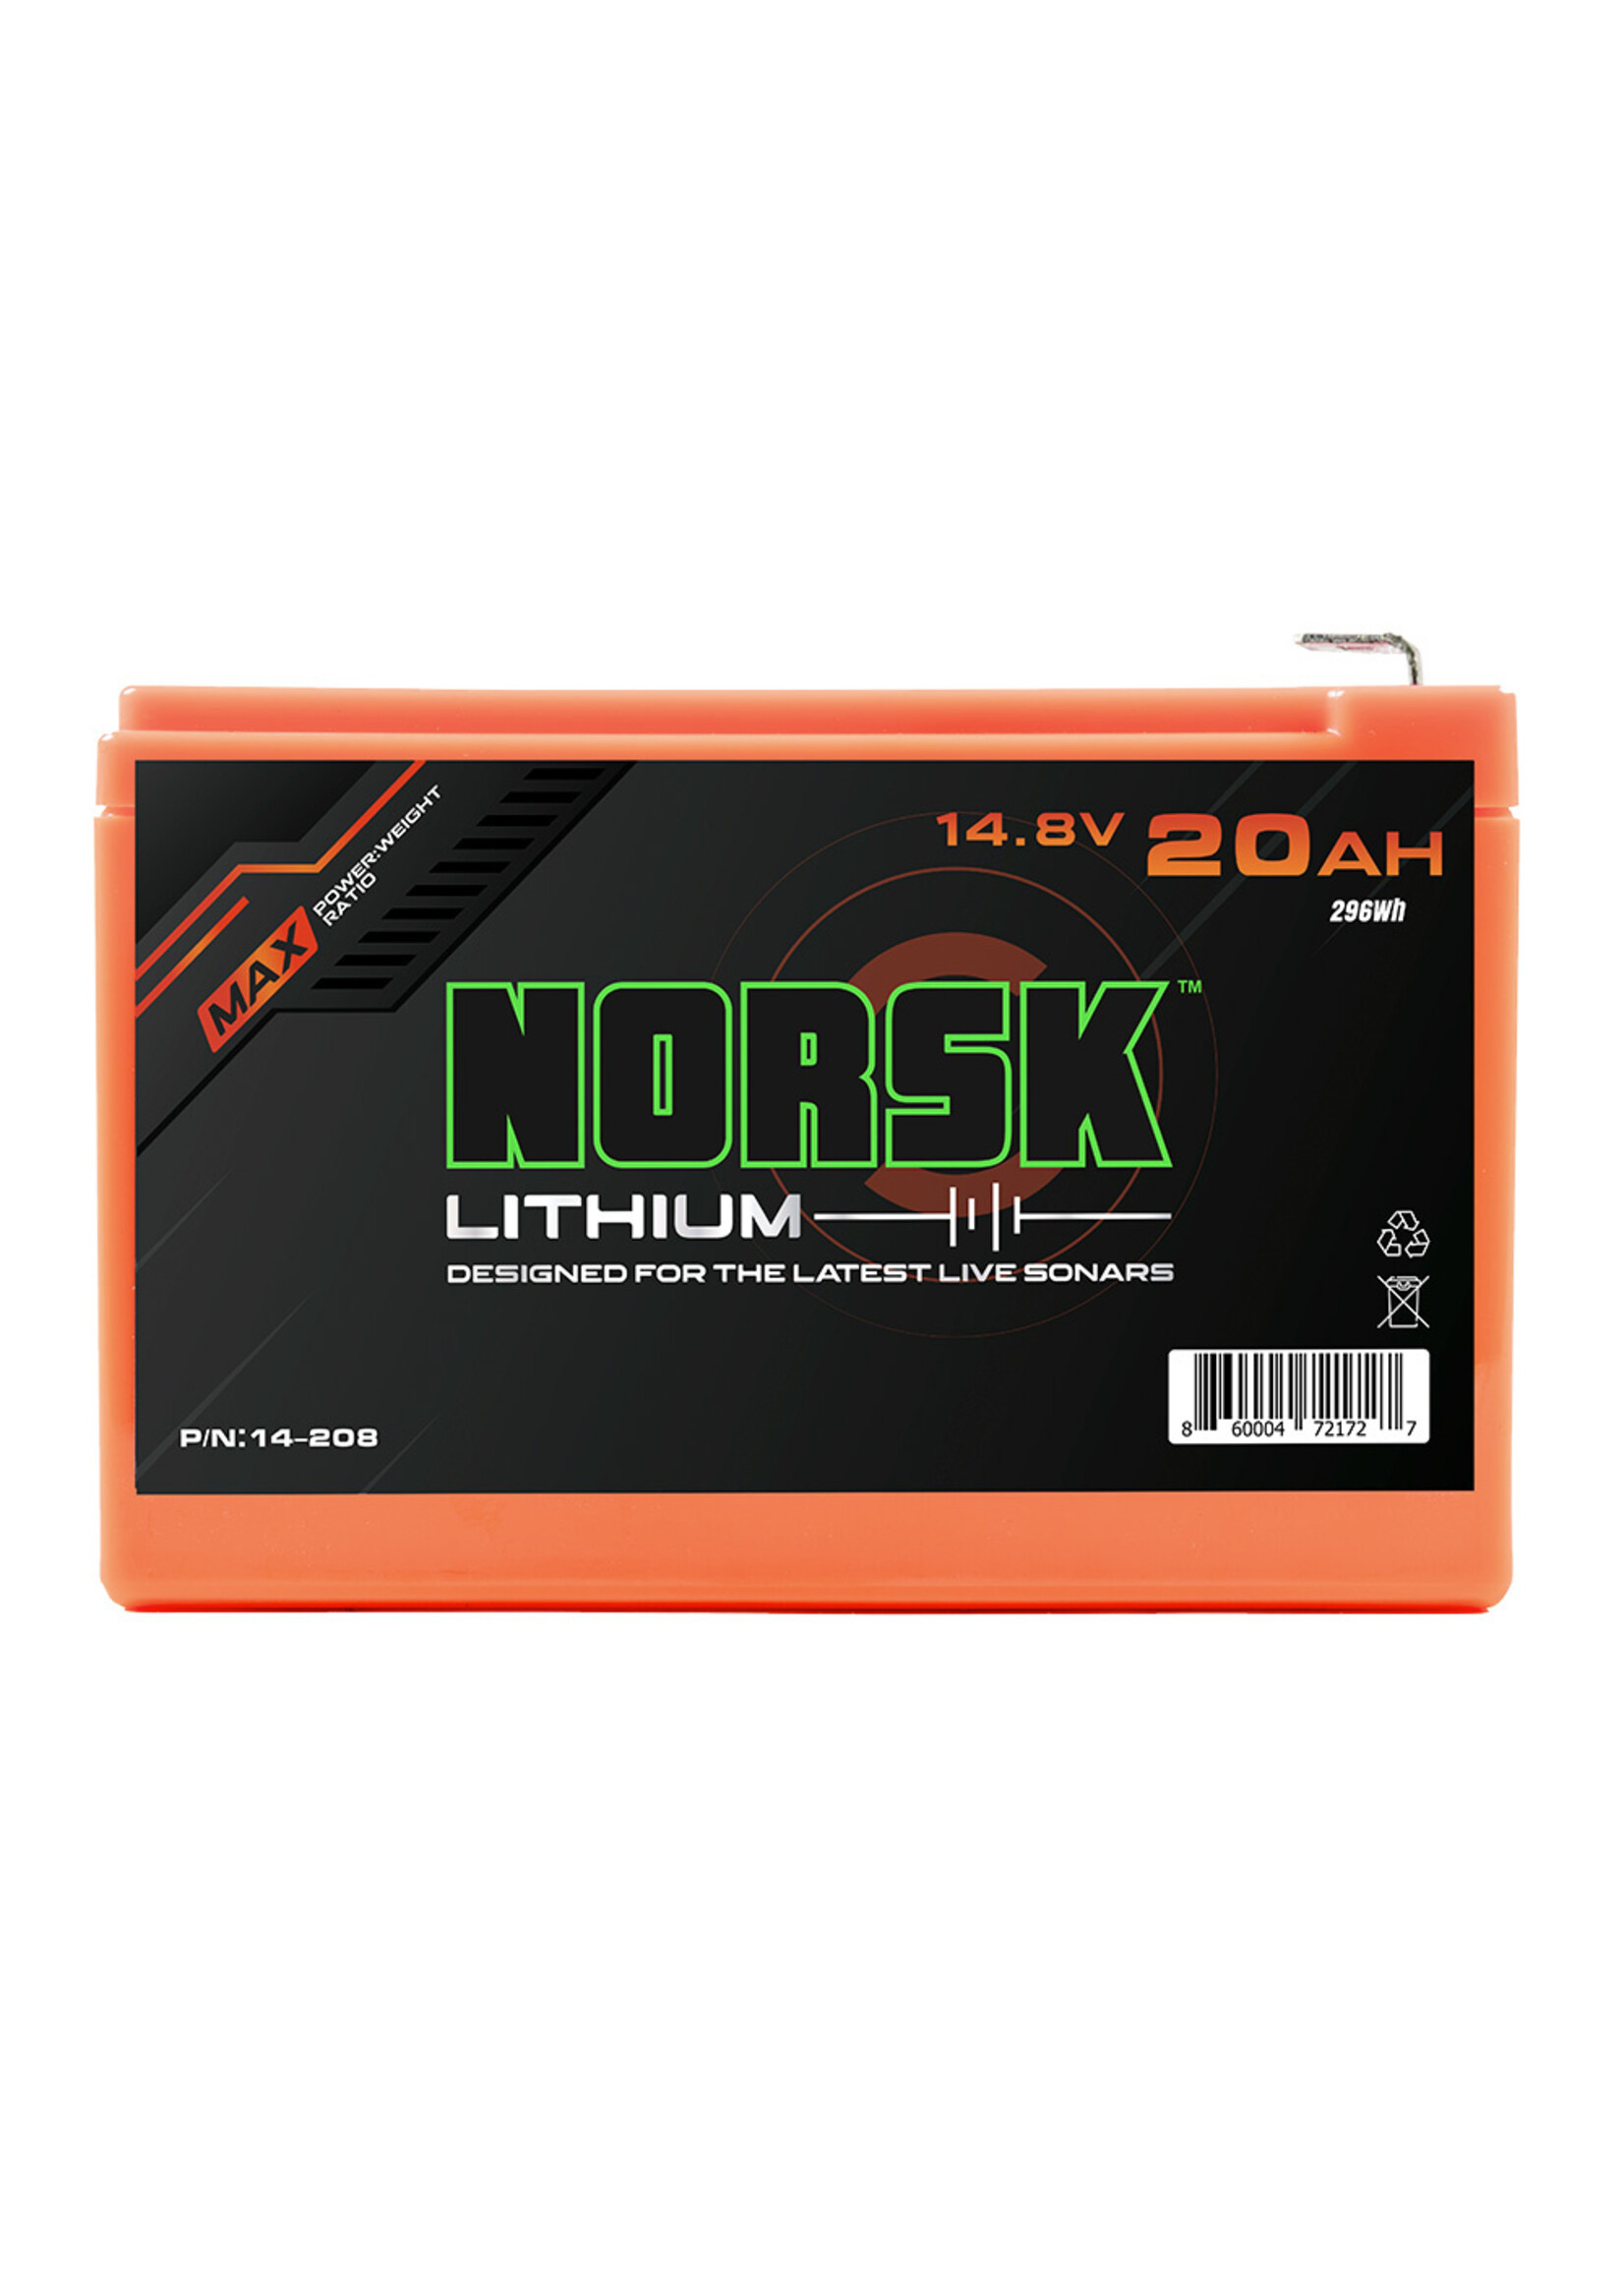 NORSK Lithium Norsk 20AH Lithium Ion Battery with Charger